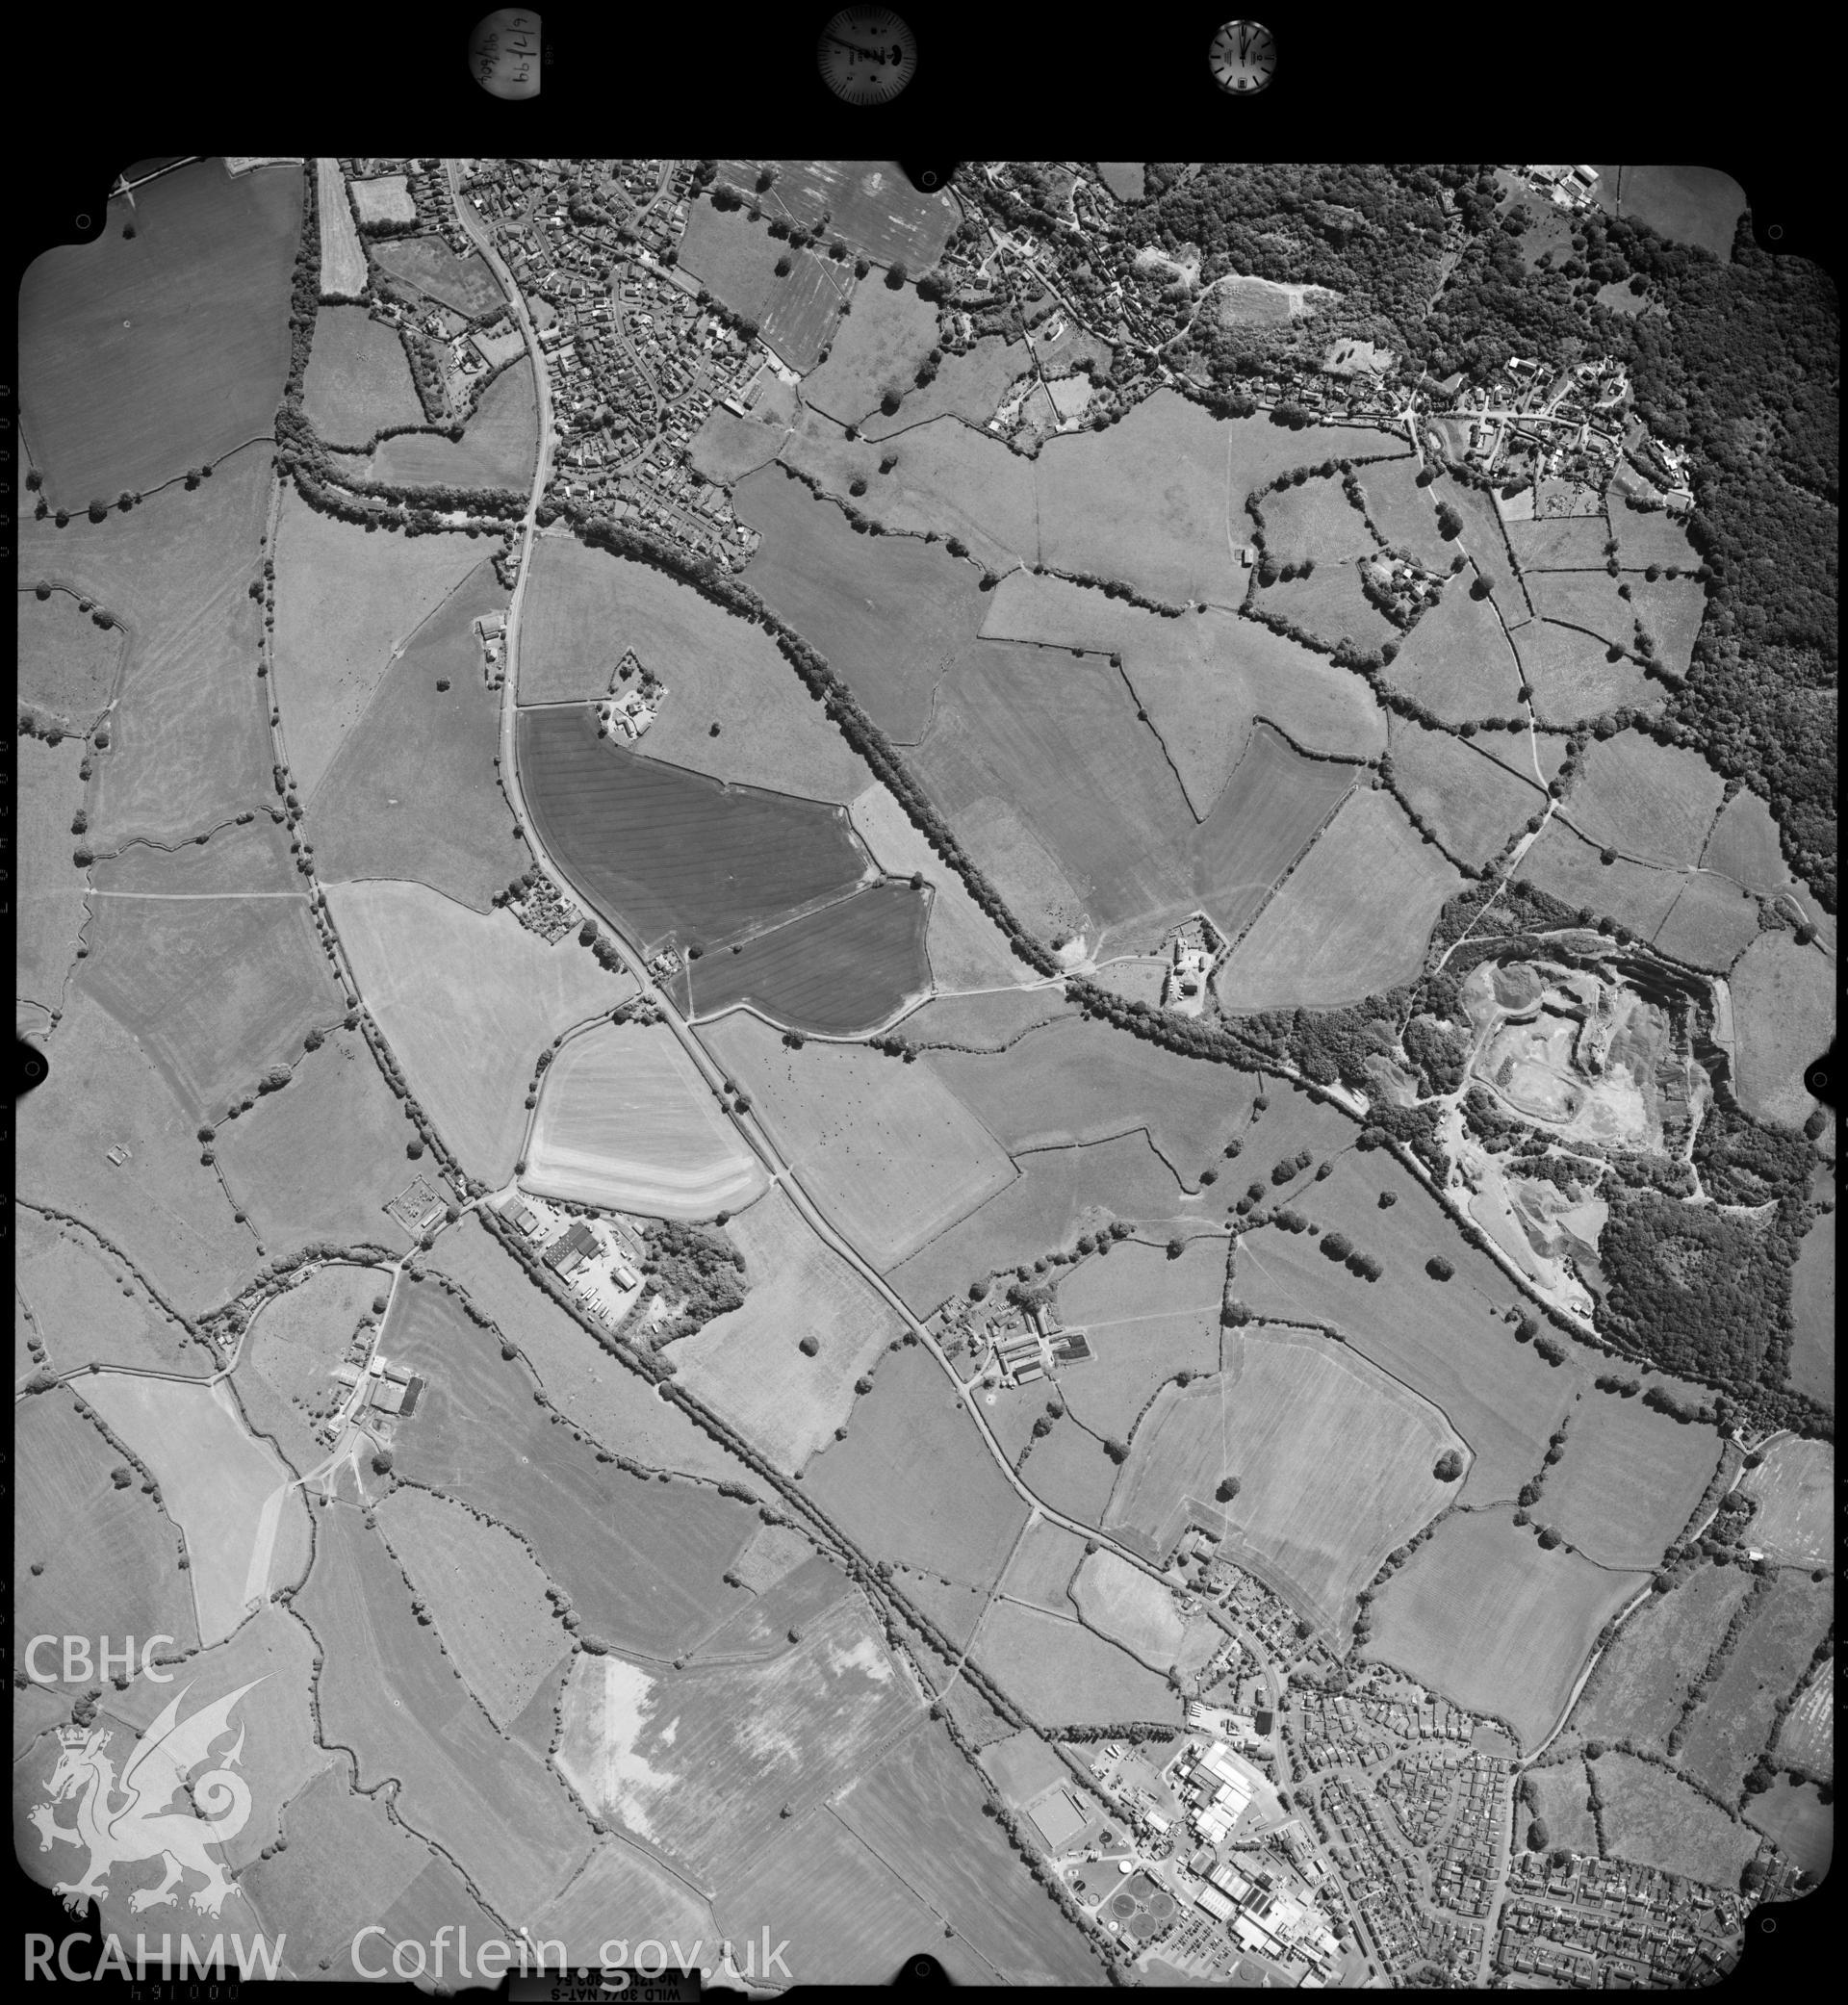 Digitized copy of an aerial photograph showing Minsterley area, Shropshire, taken by Ordnance Survey, 1999